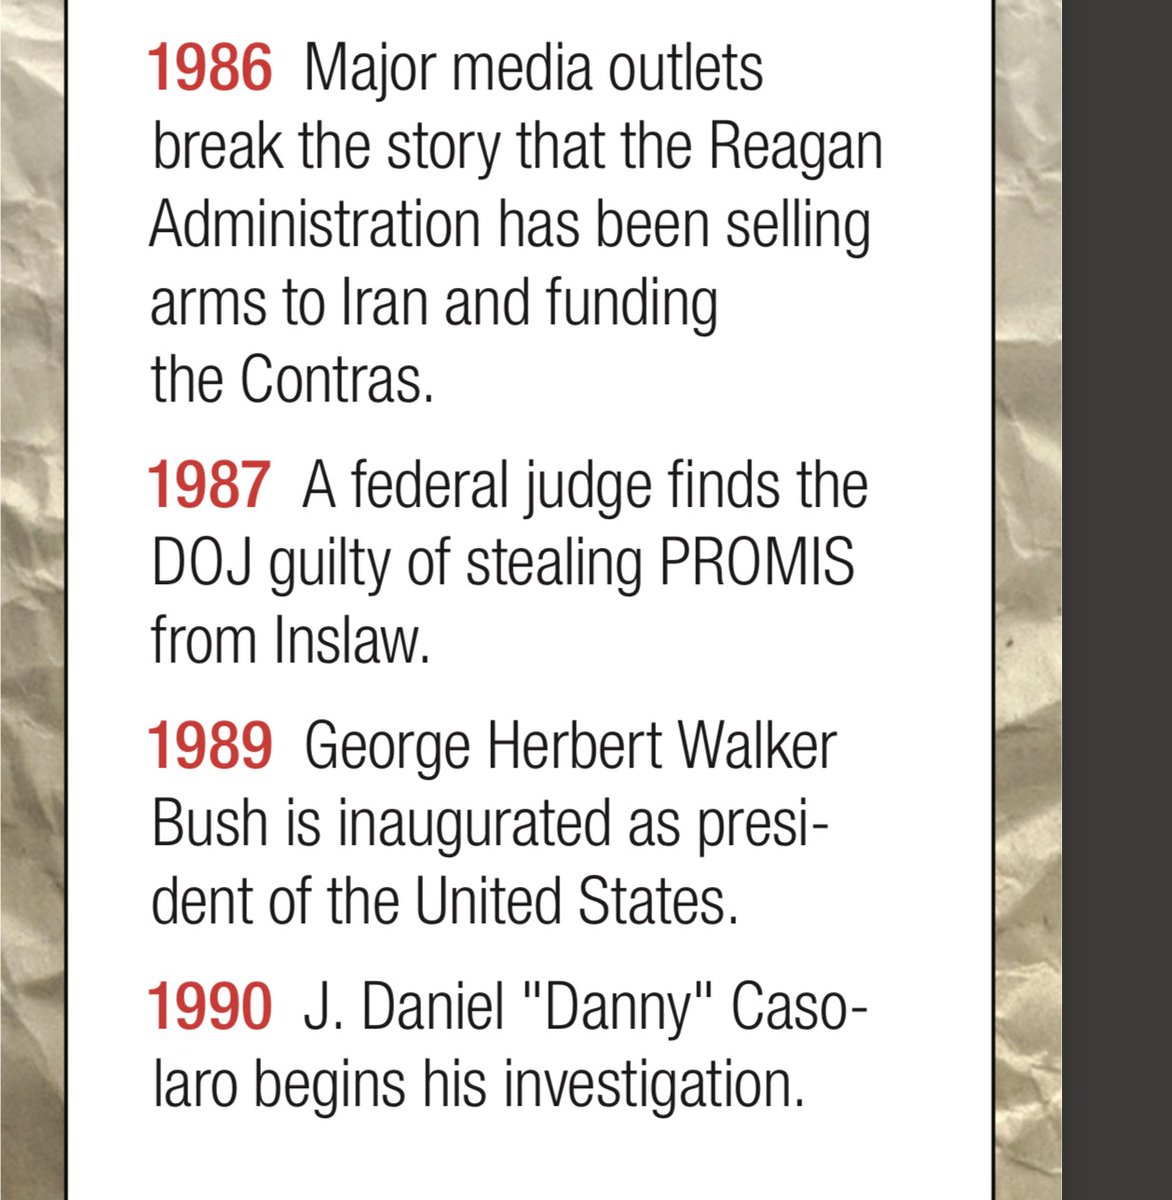 1986 Major media outlets break the story that the Reagan Administration has been selling arms to Iran and fundingthe Contras.1987 A federal judge finds the DOJ guilty of stealing PROMIS from Inslaw.